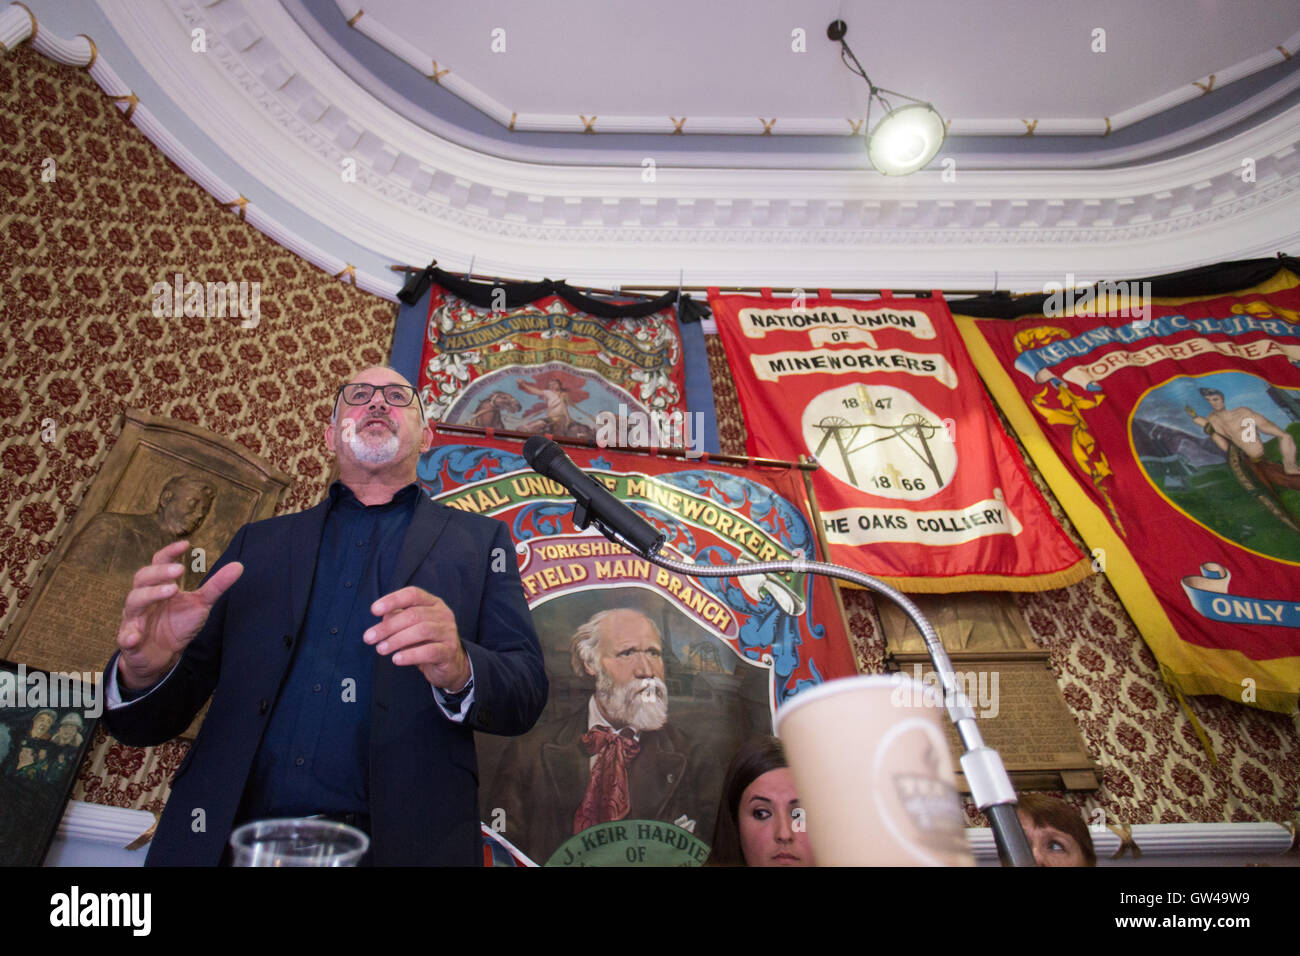 Jon Trickett, Labour politician and MP for Hemsworth, speaks at a rally, held at the National Union of Mineworkers, in Barnsley. Stock Photo